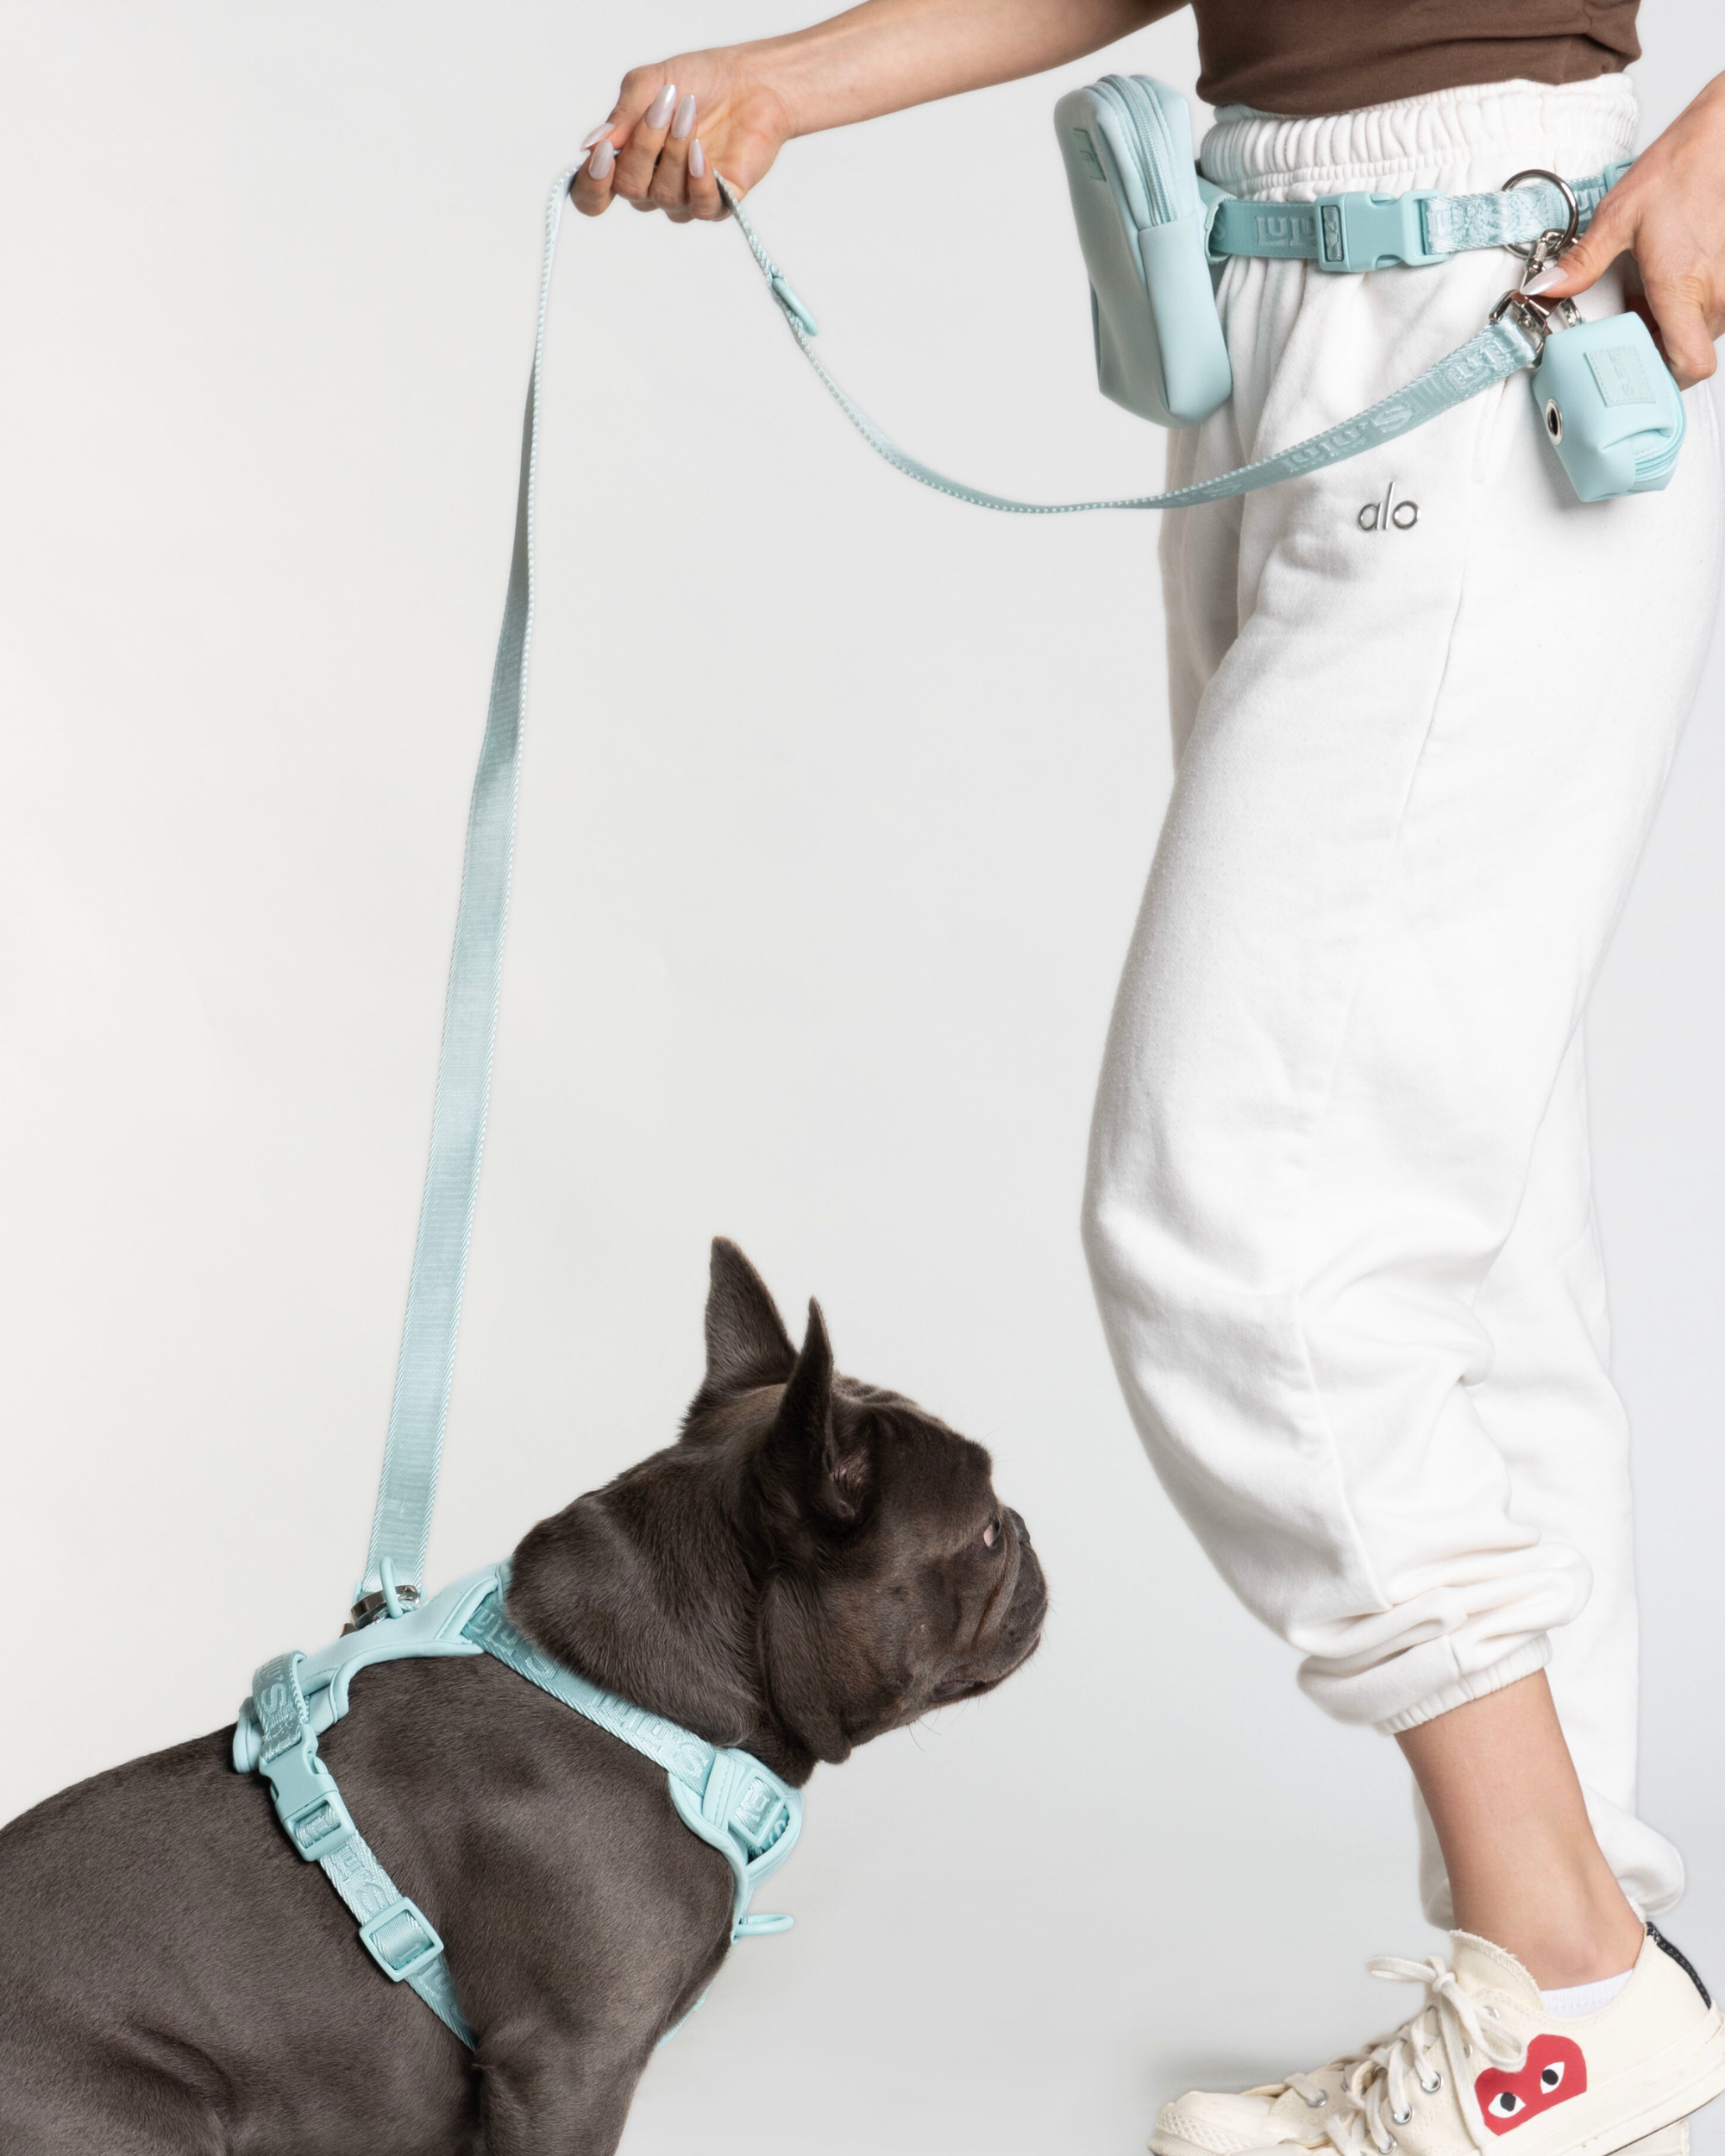 Person wearing white pants and a brown top, holding a leash and walking a black dog. The dog is wearing a Cali Blue harness and leash, and the person has a matching pouch and poop bag holder, all featuring the Lulu's brand logo.